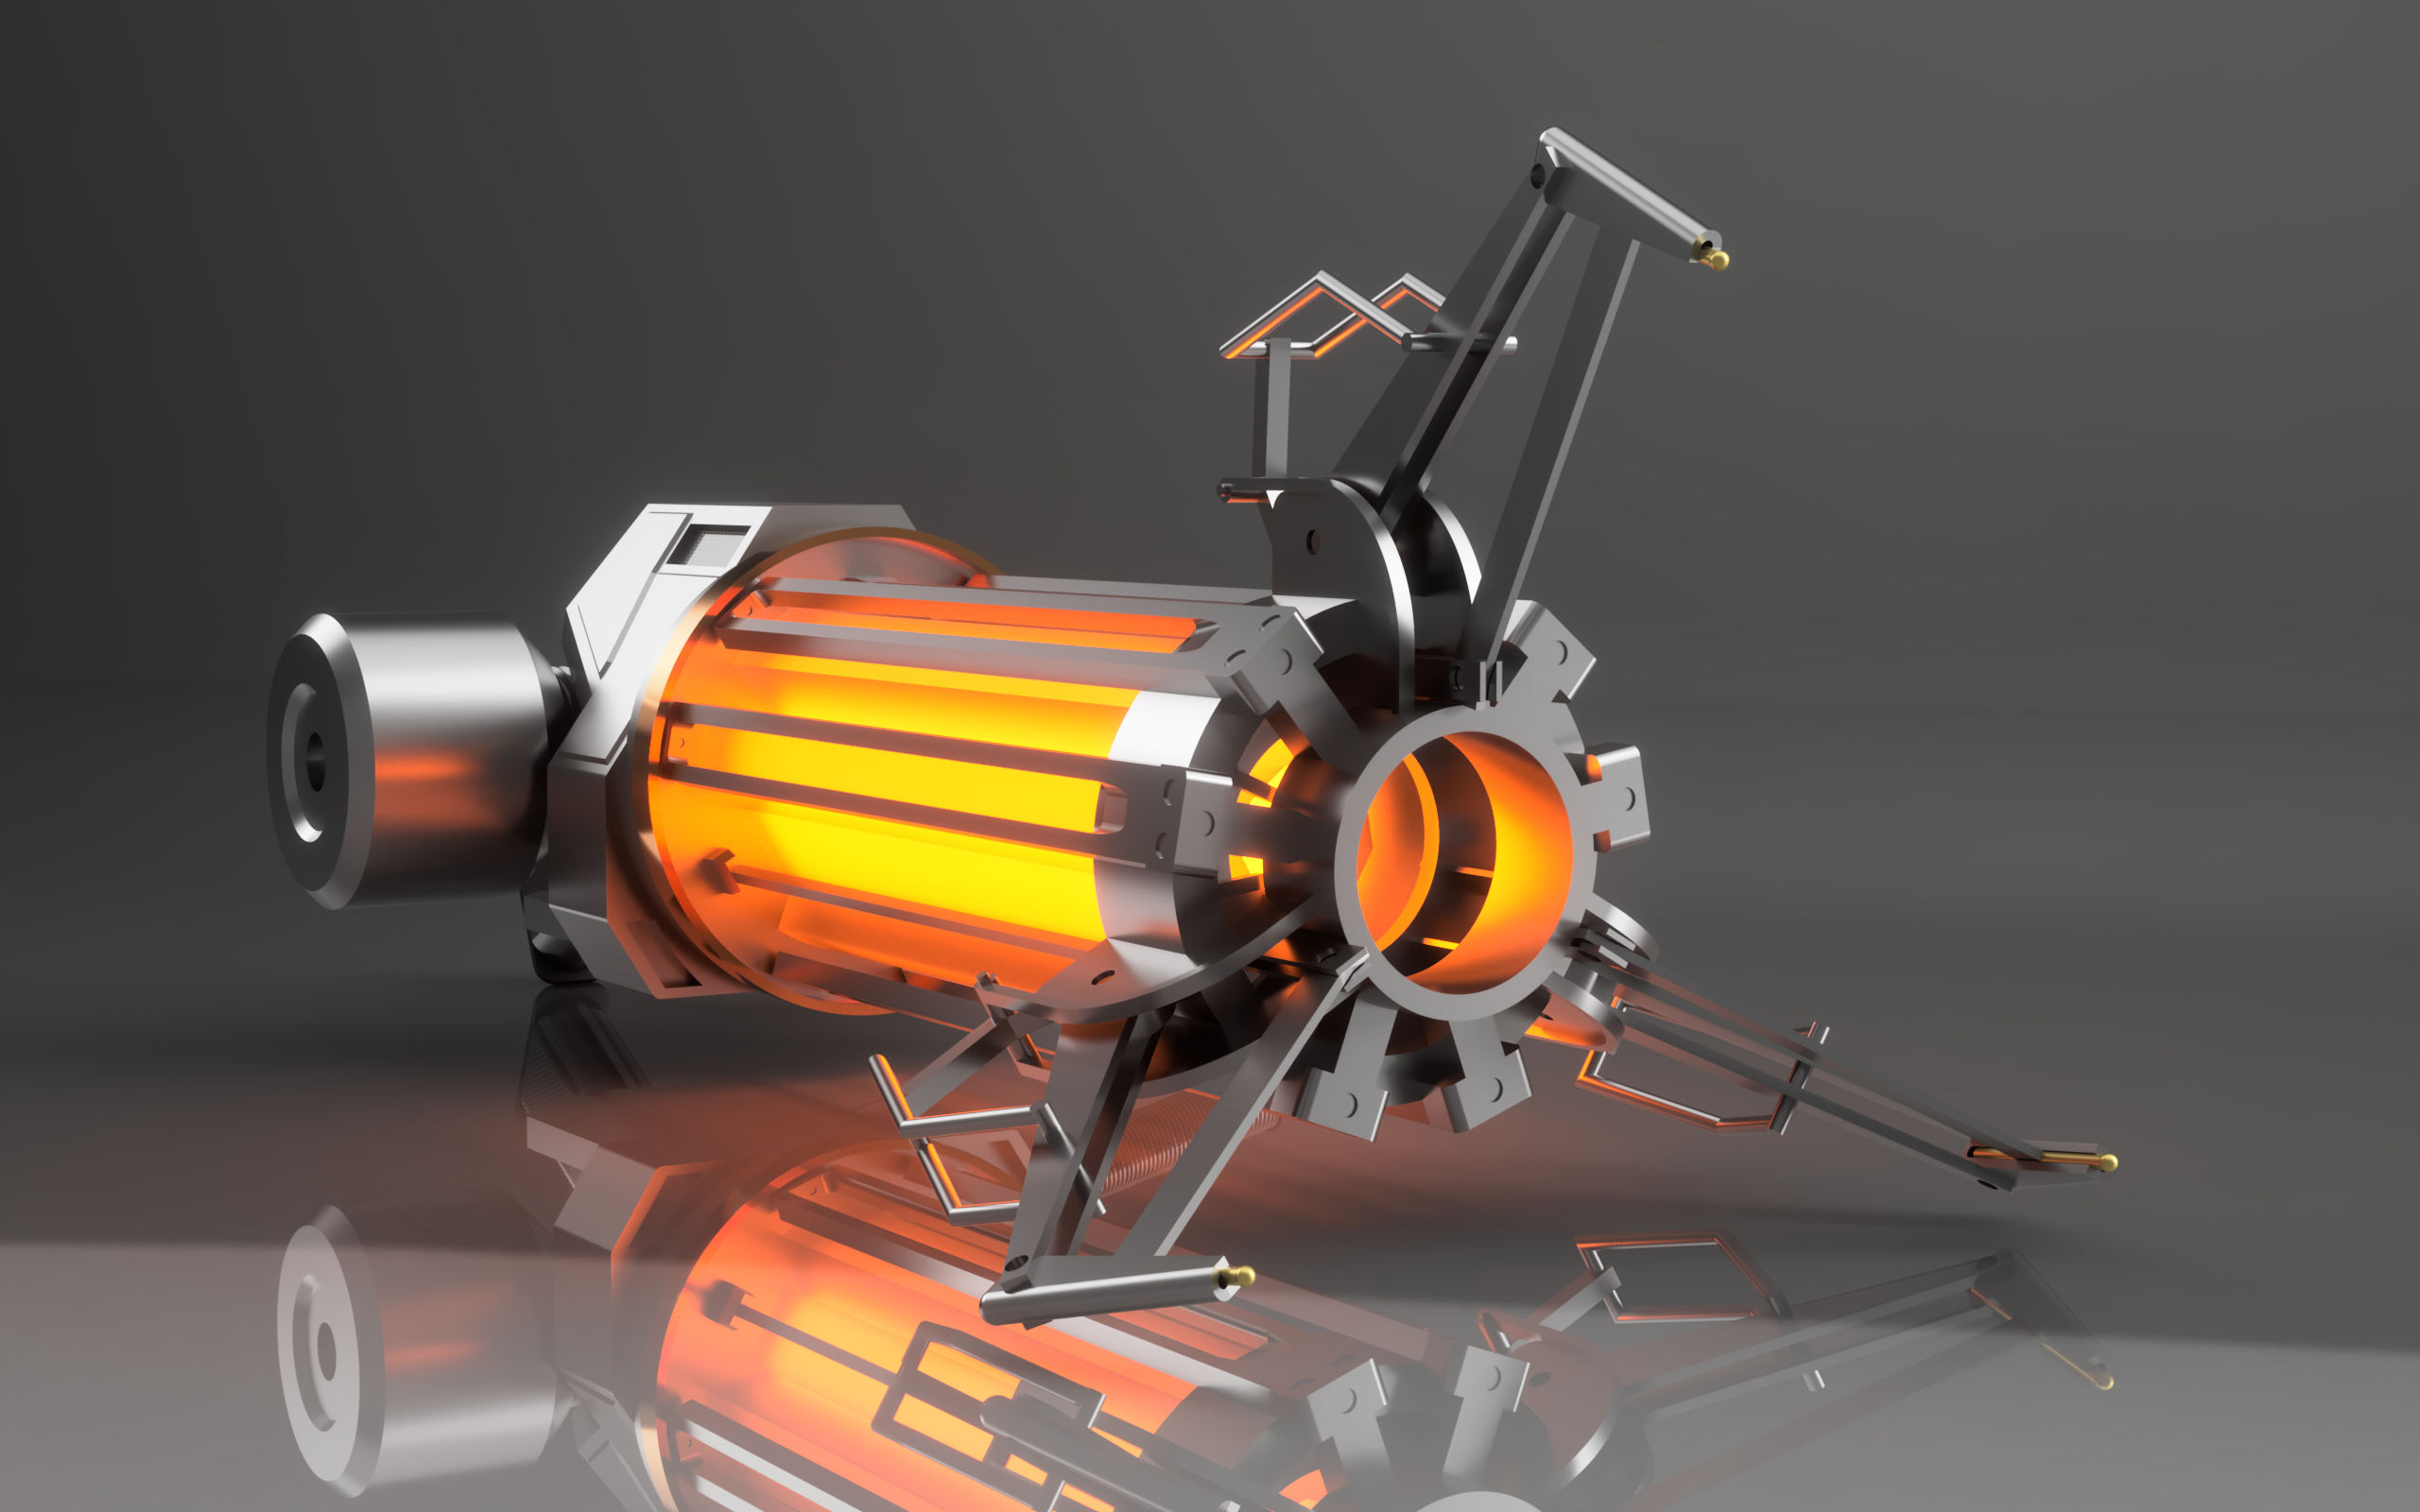 Famous Video Game Weapons - The Gravity Gun